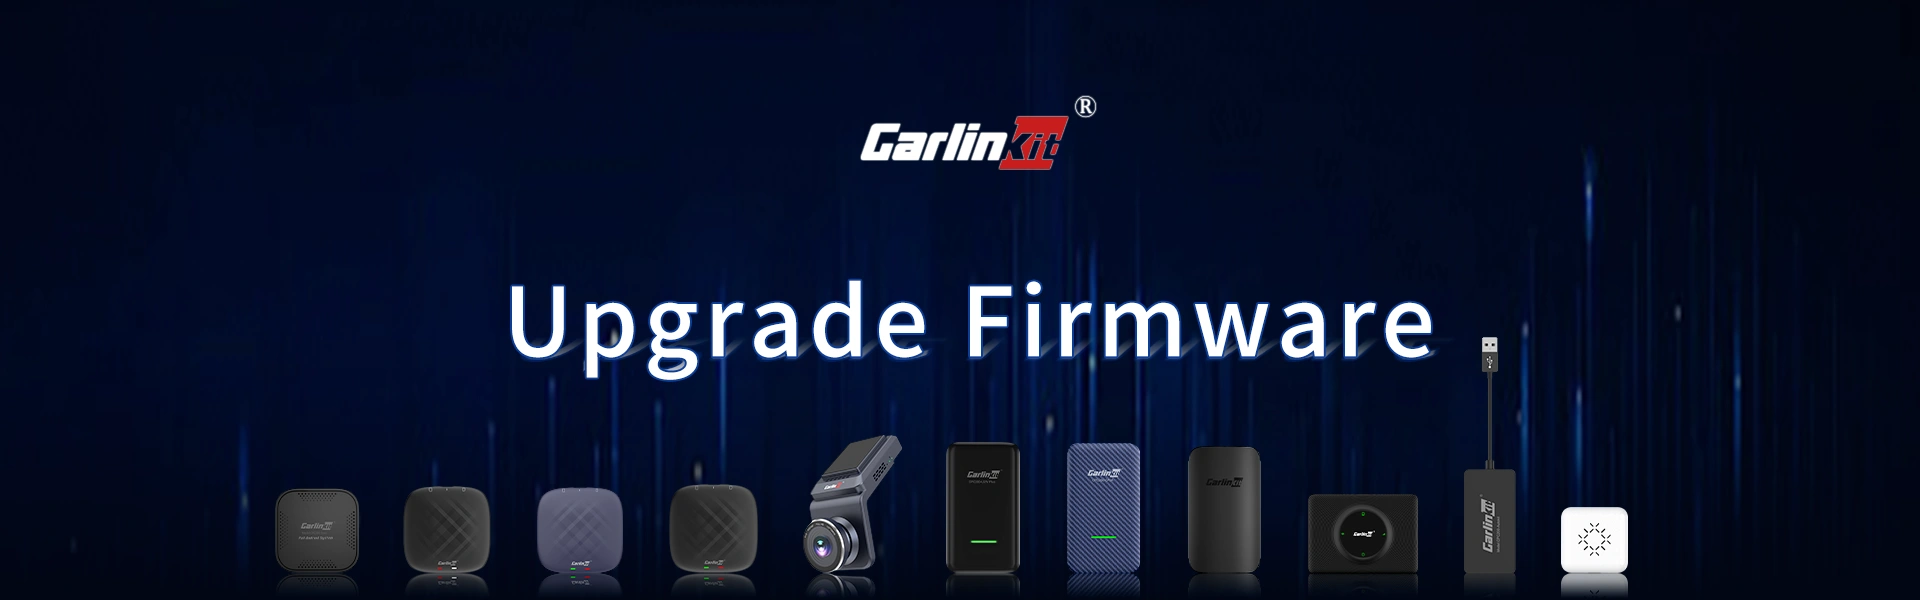 How to get CarlinKit firmware for upgrade/downgrade?